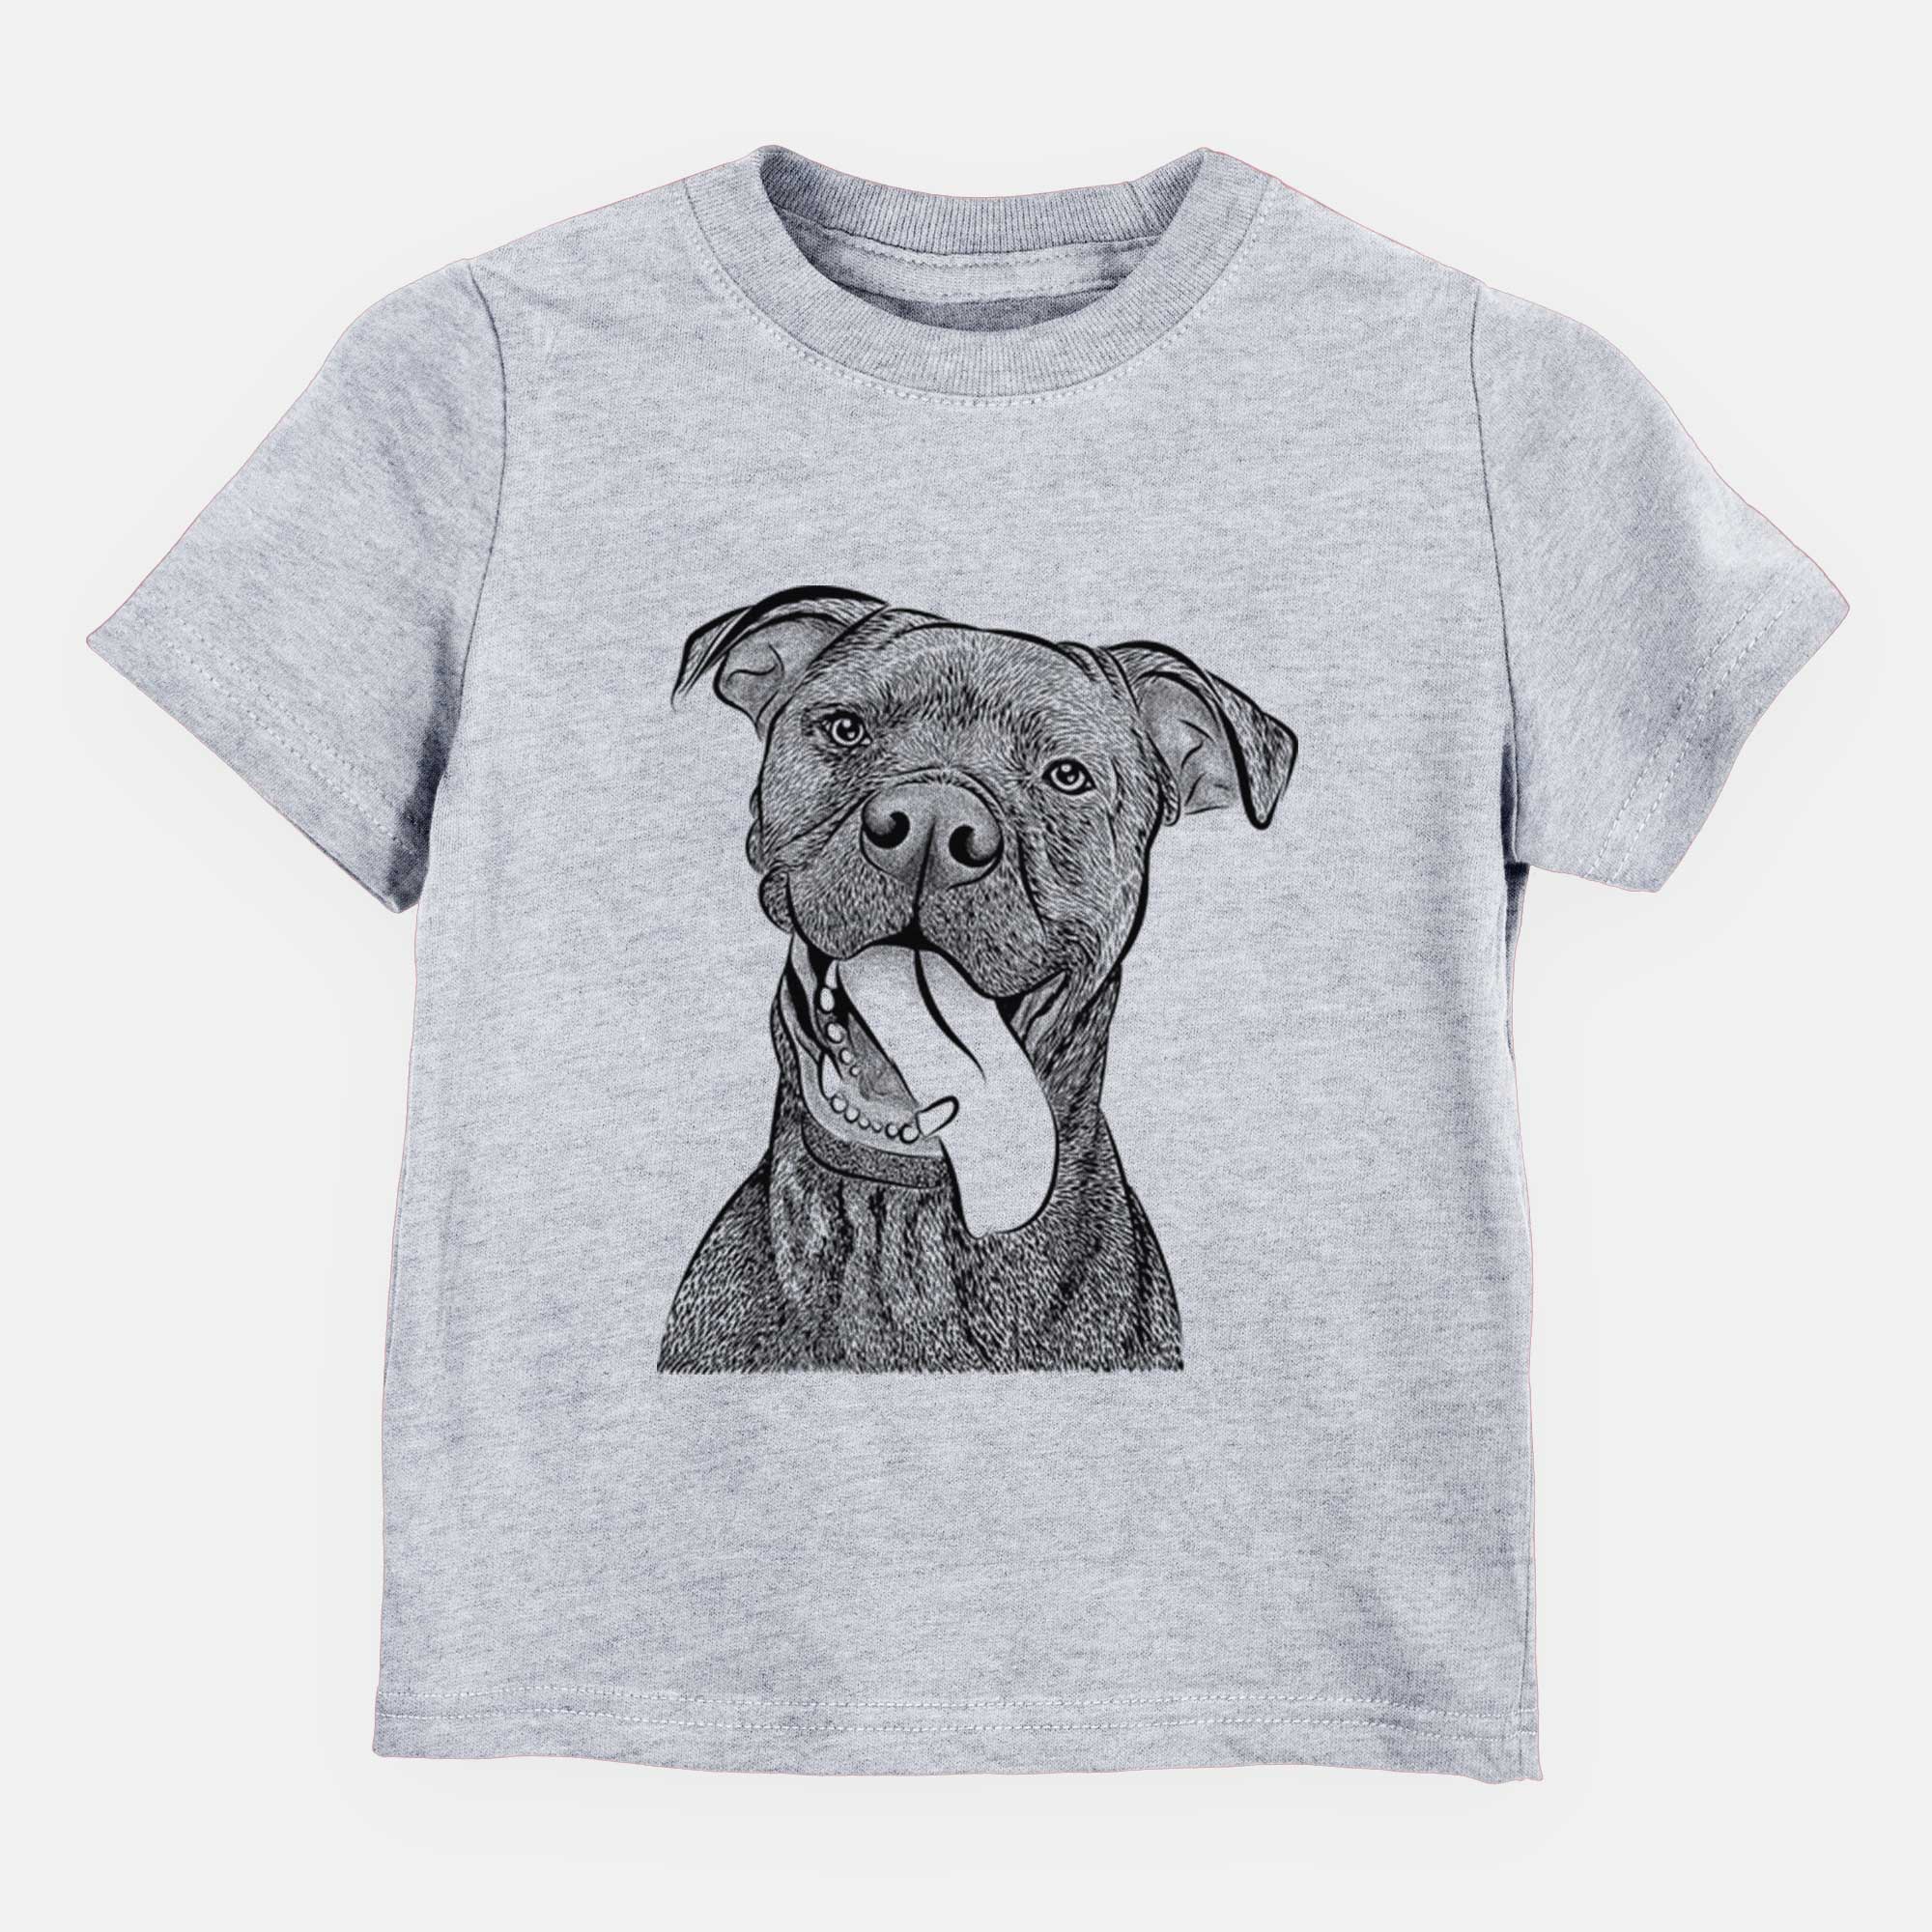 Bare Mikey the Boxador - Kids/Youth/Toddler Shirt